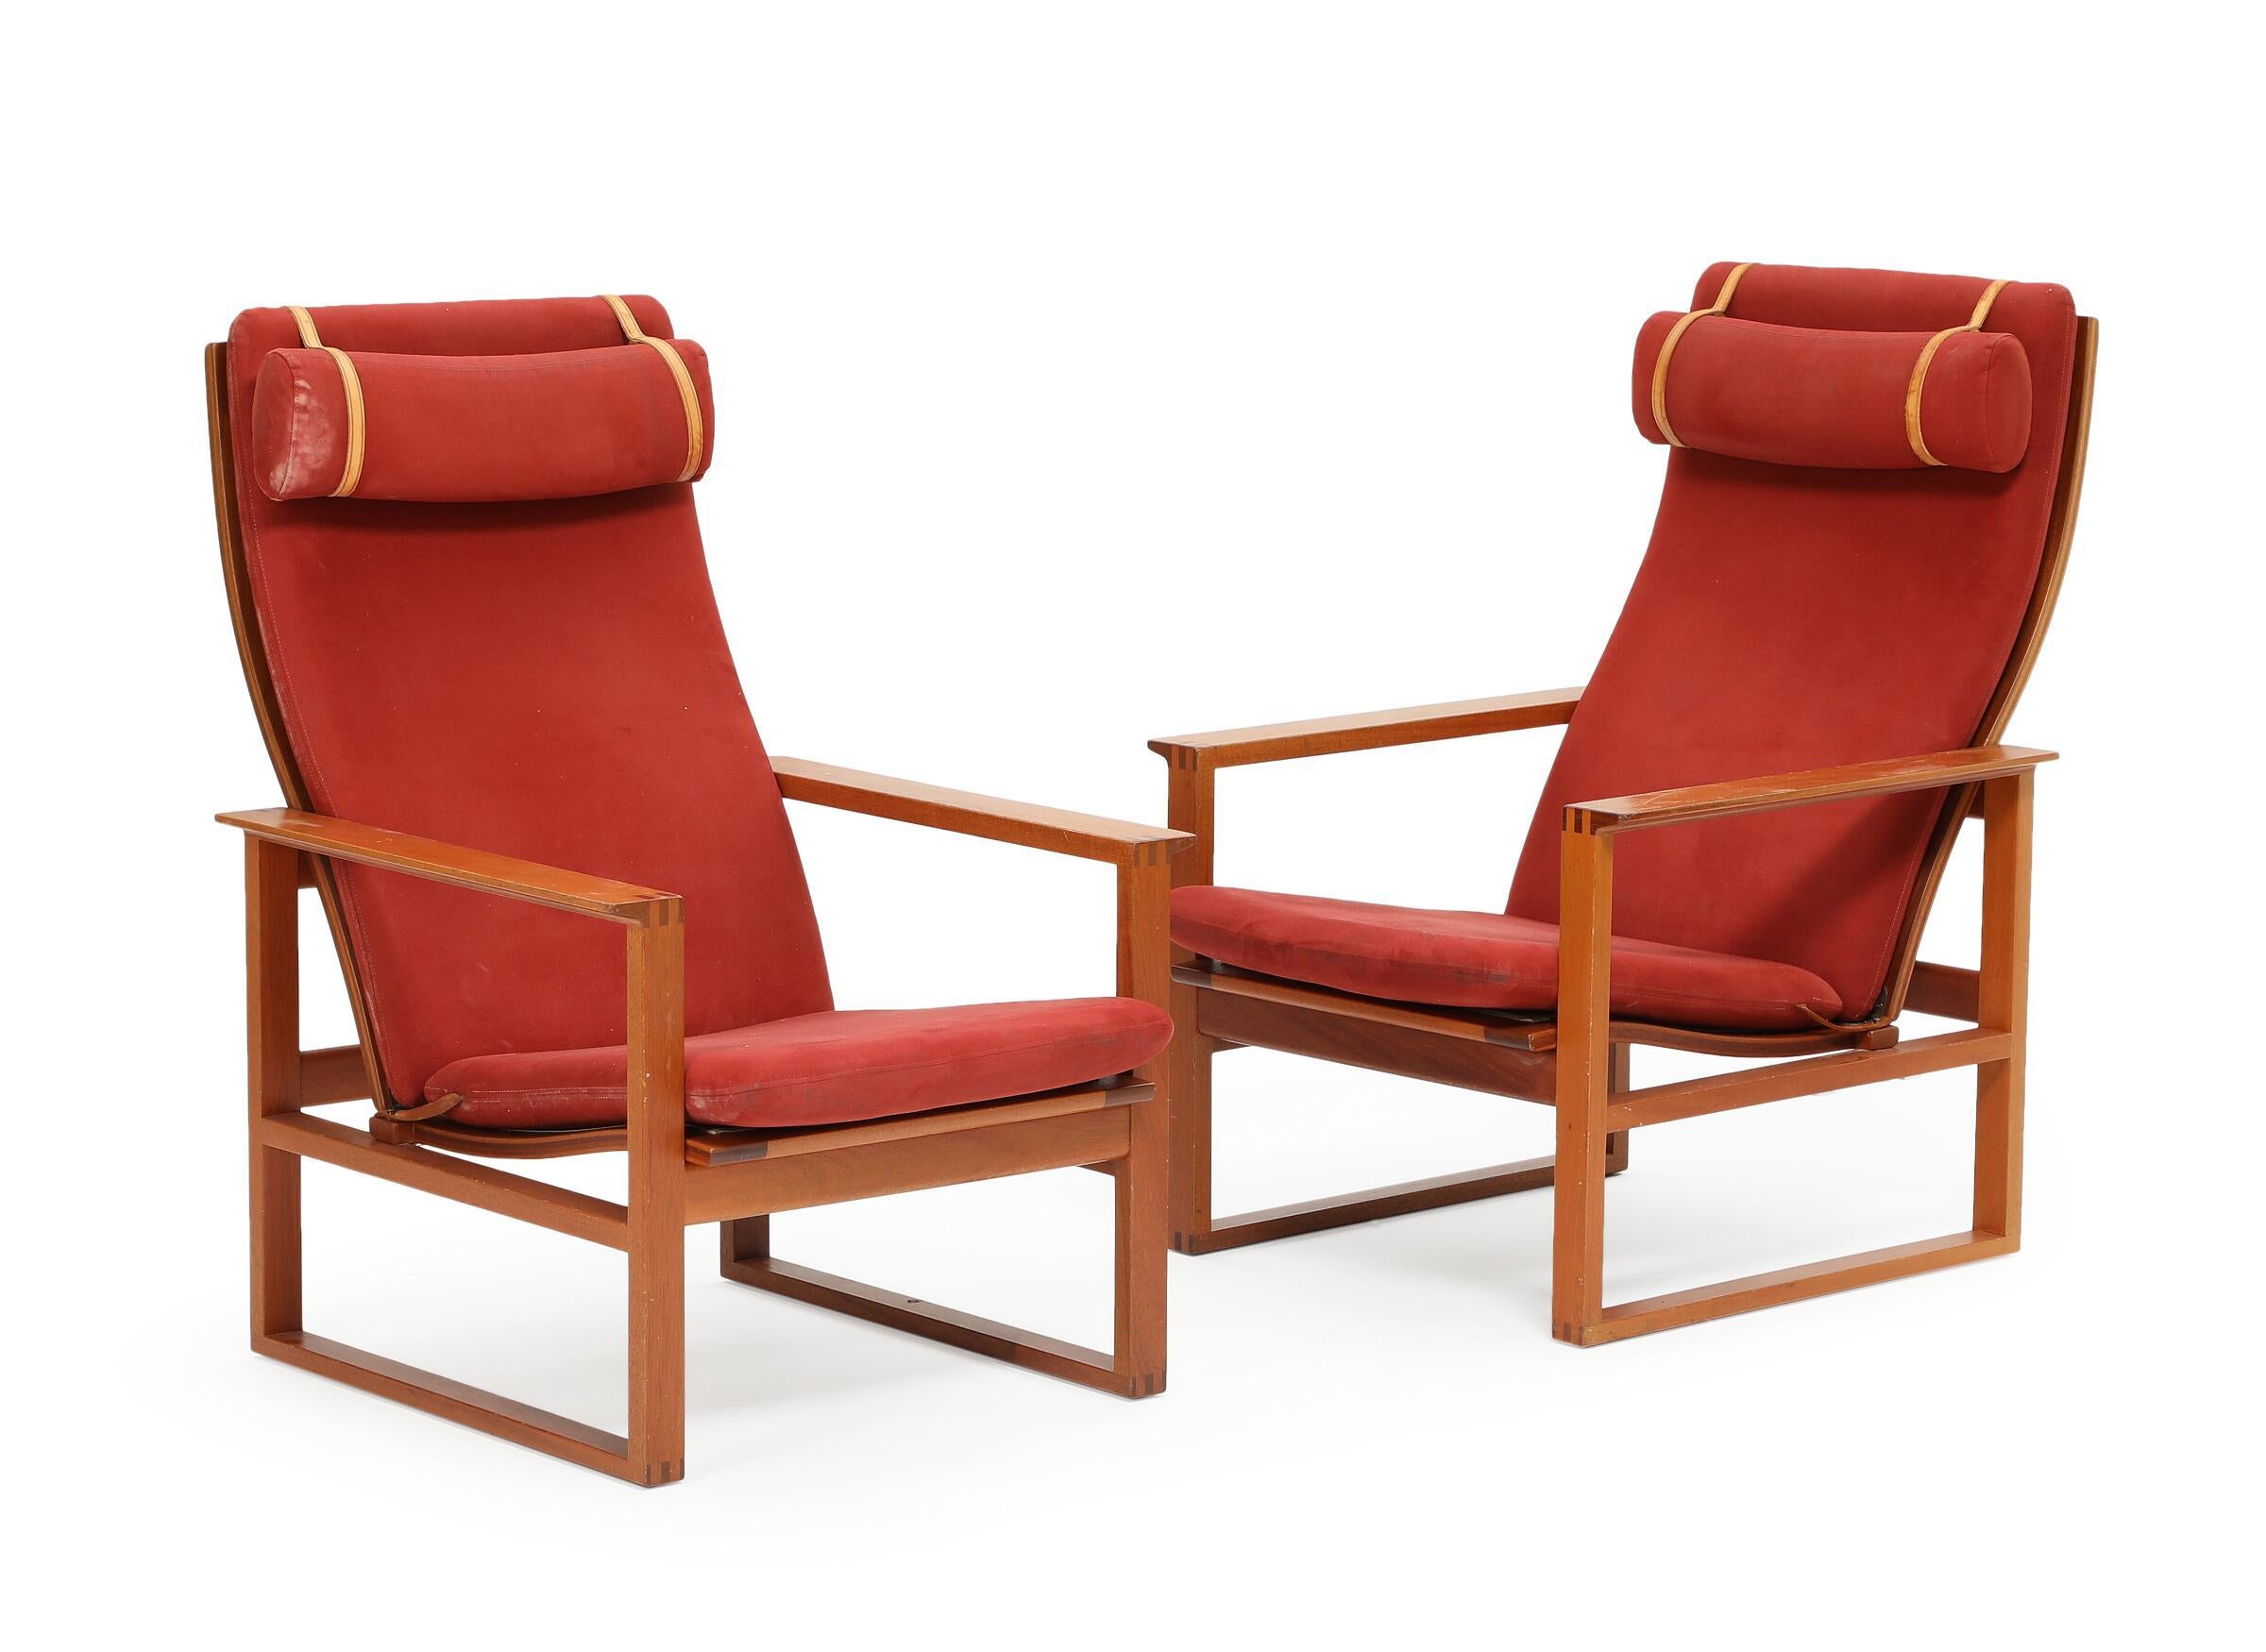 Mid-Century Modern Børge Mogensen: “The Runner Chair”, Pair of High-Backed Mahogany Easy Chairs